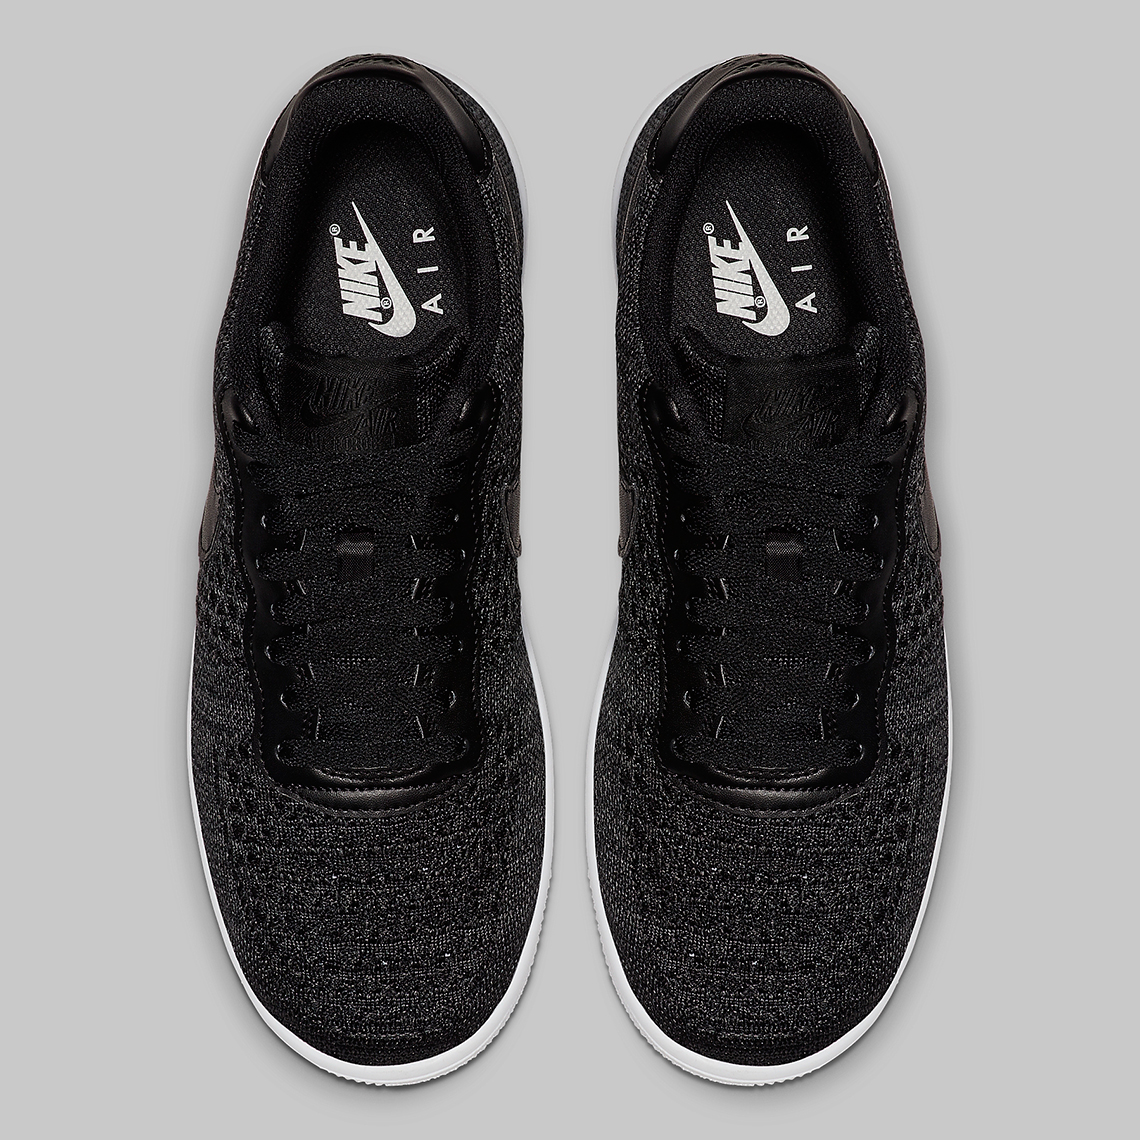 Nike Air Force 1 Flyknit Black Anthracite Ci0051 001 3